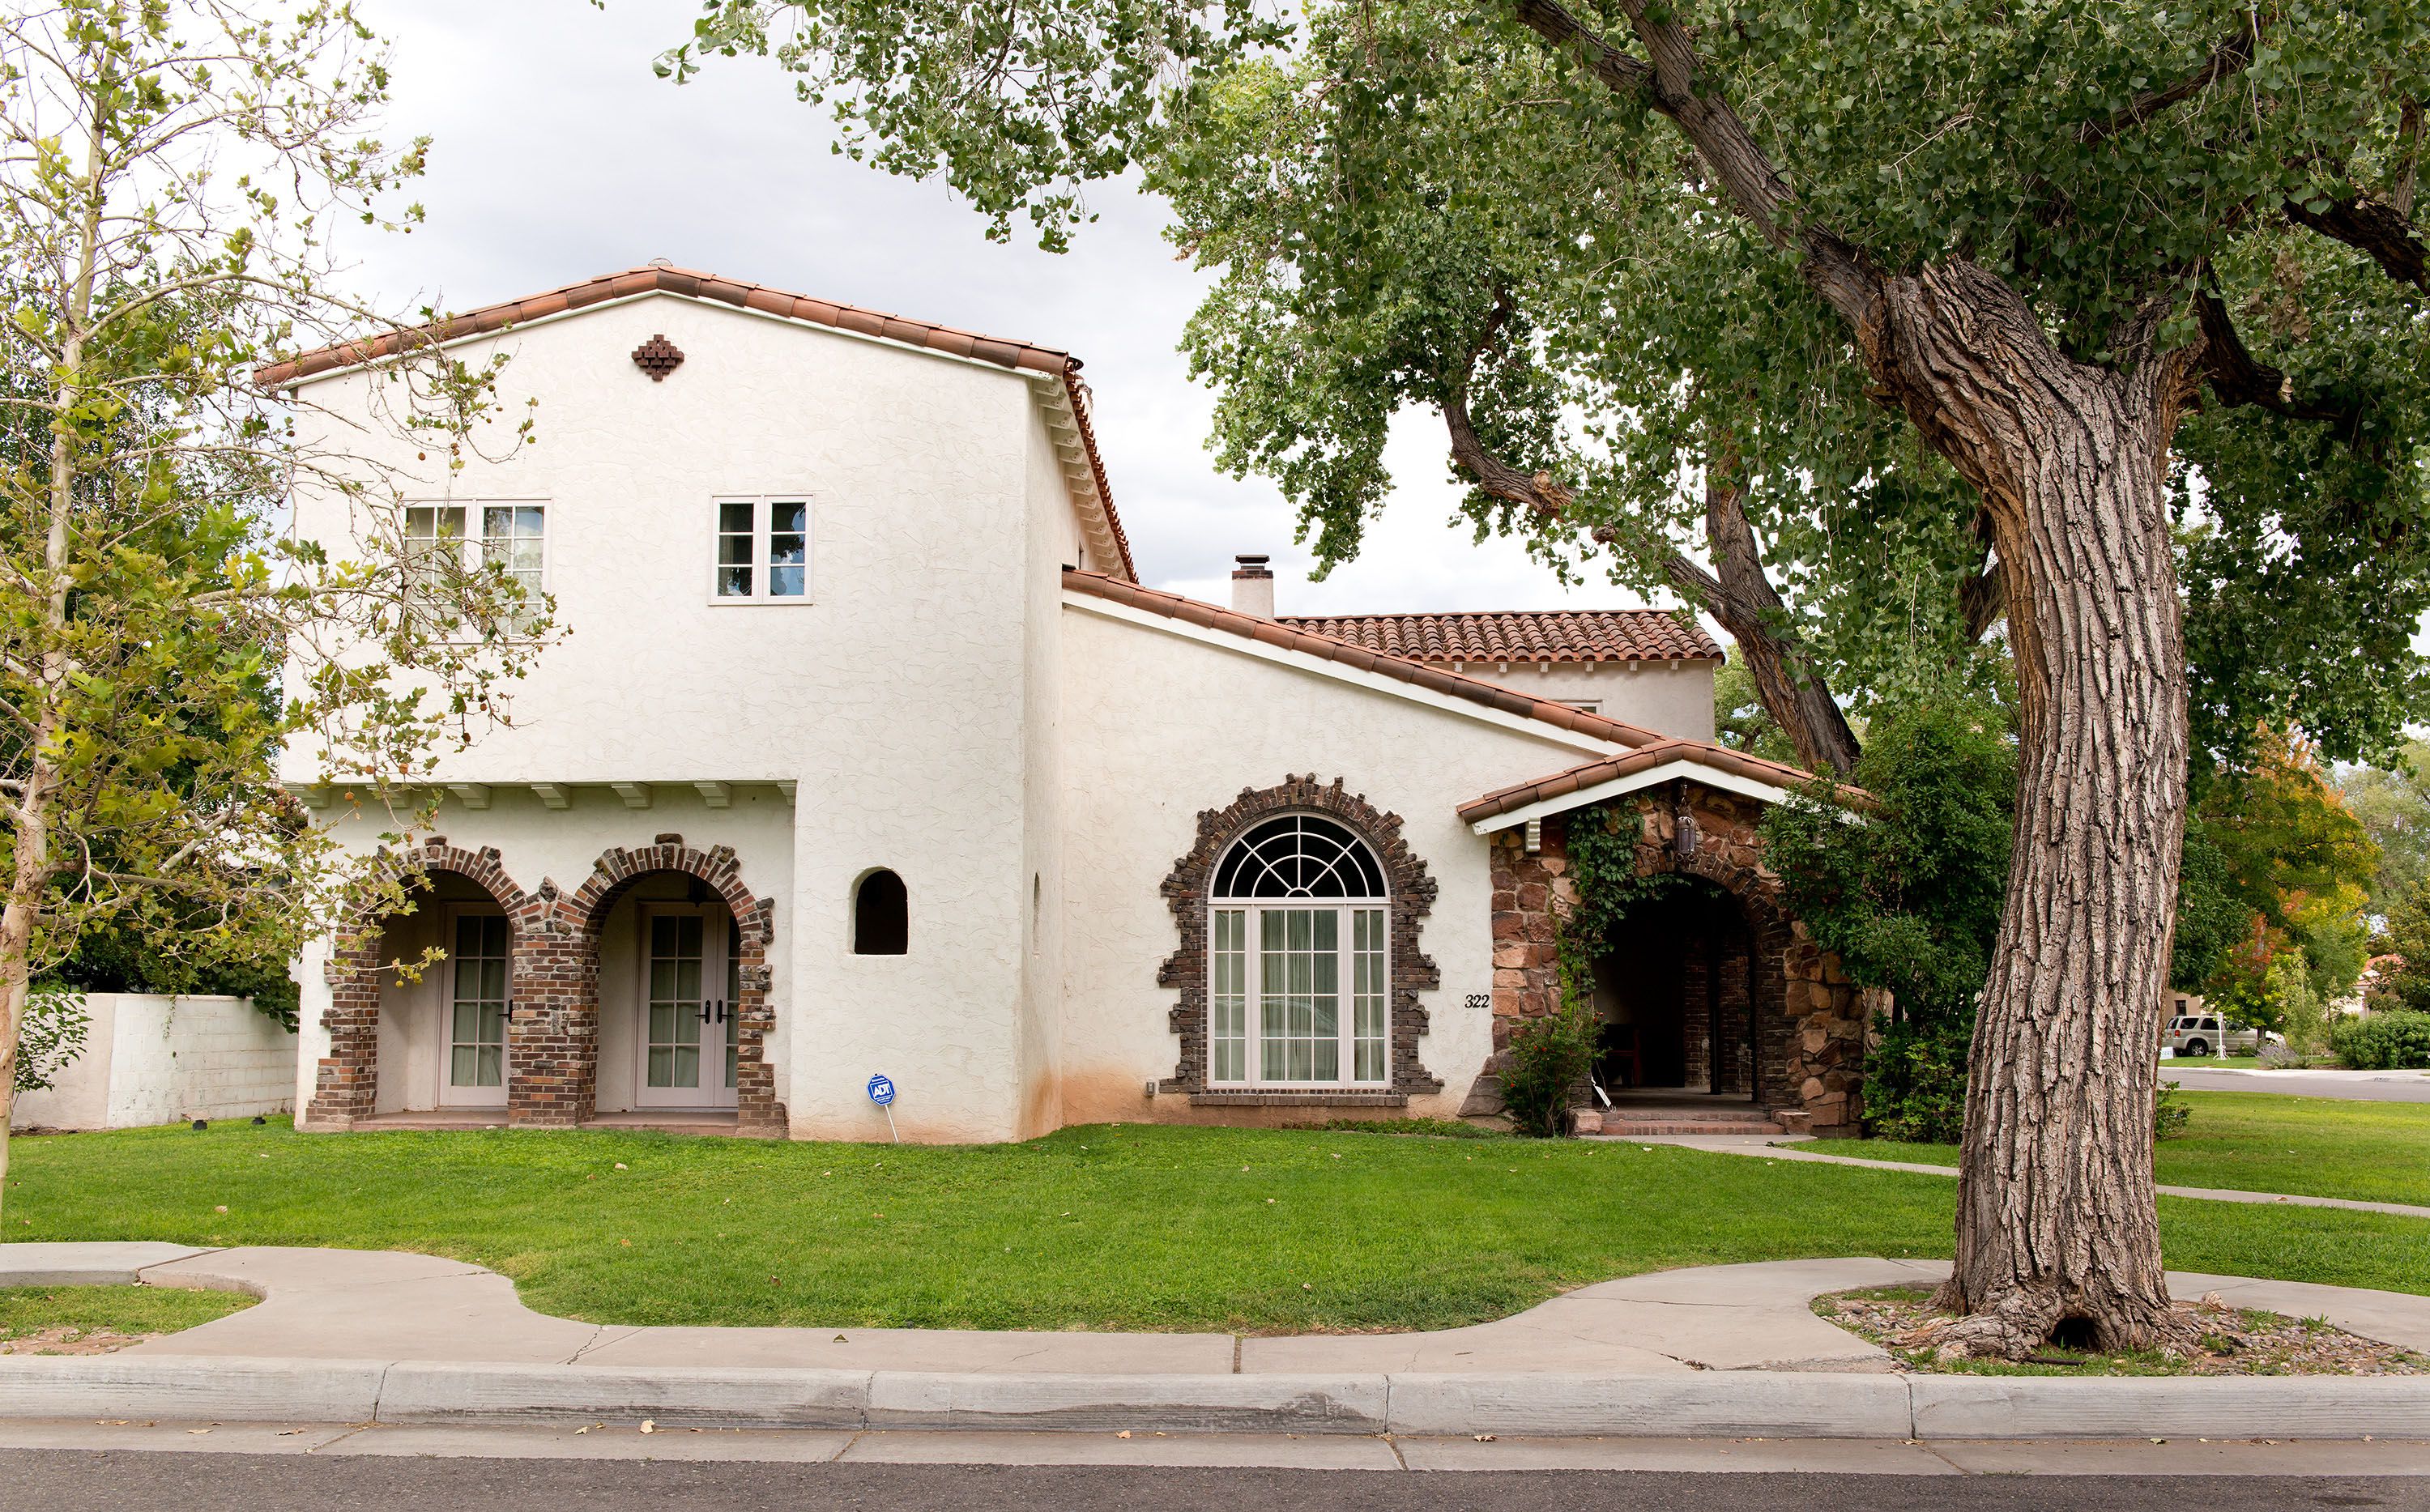 A view of Jesse Pinkman's house. (Steve Snowden—Getty Images)